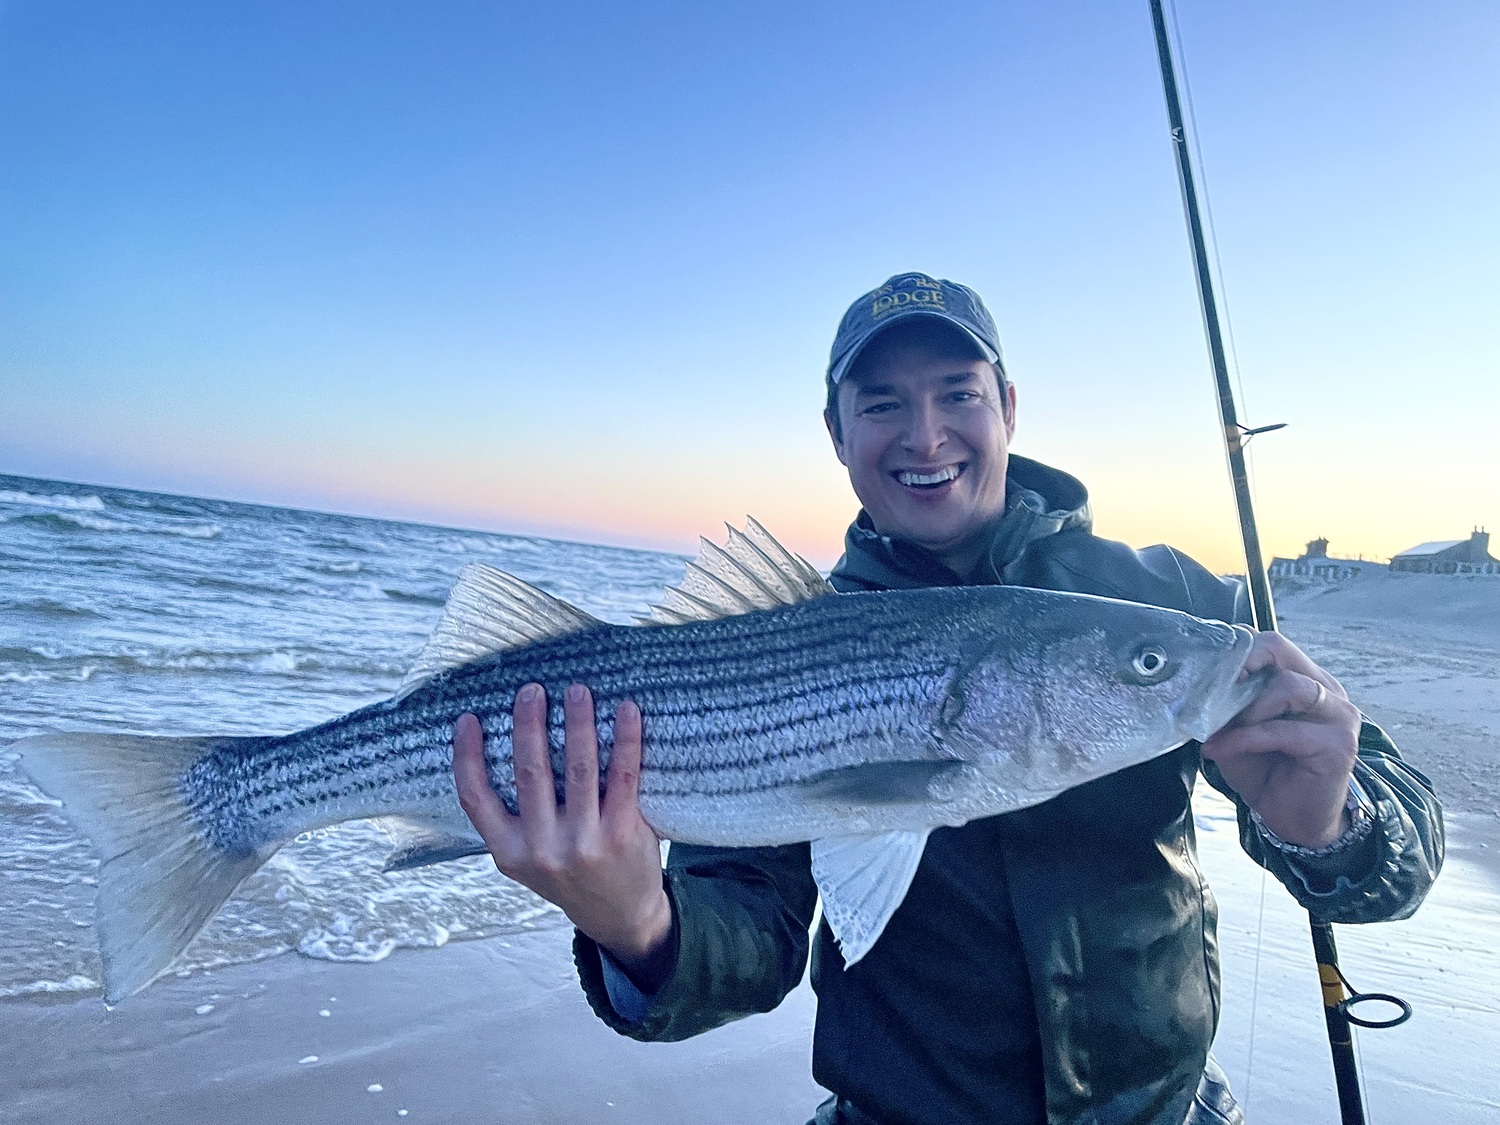 After some outfitting and advice from Ken at Tight Lines Tackle in Southampton Village, Derek de Svastich went out and beached his first ever striped bass caught from the surf on Friday evening.